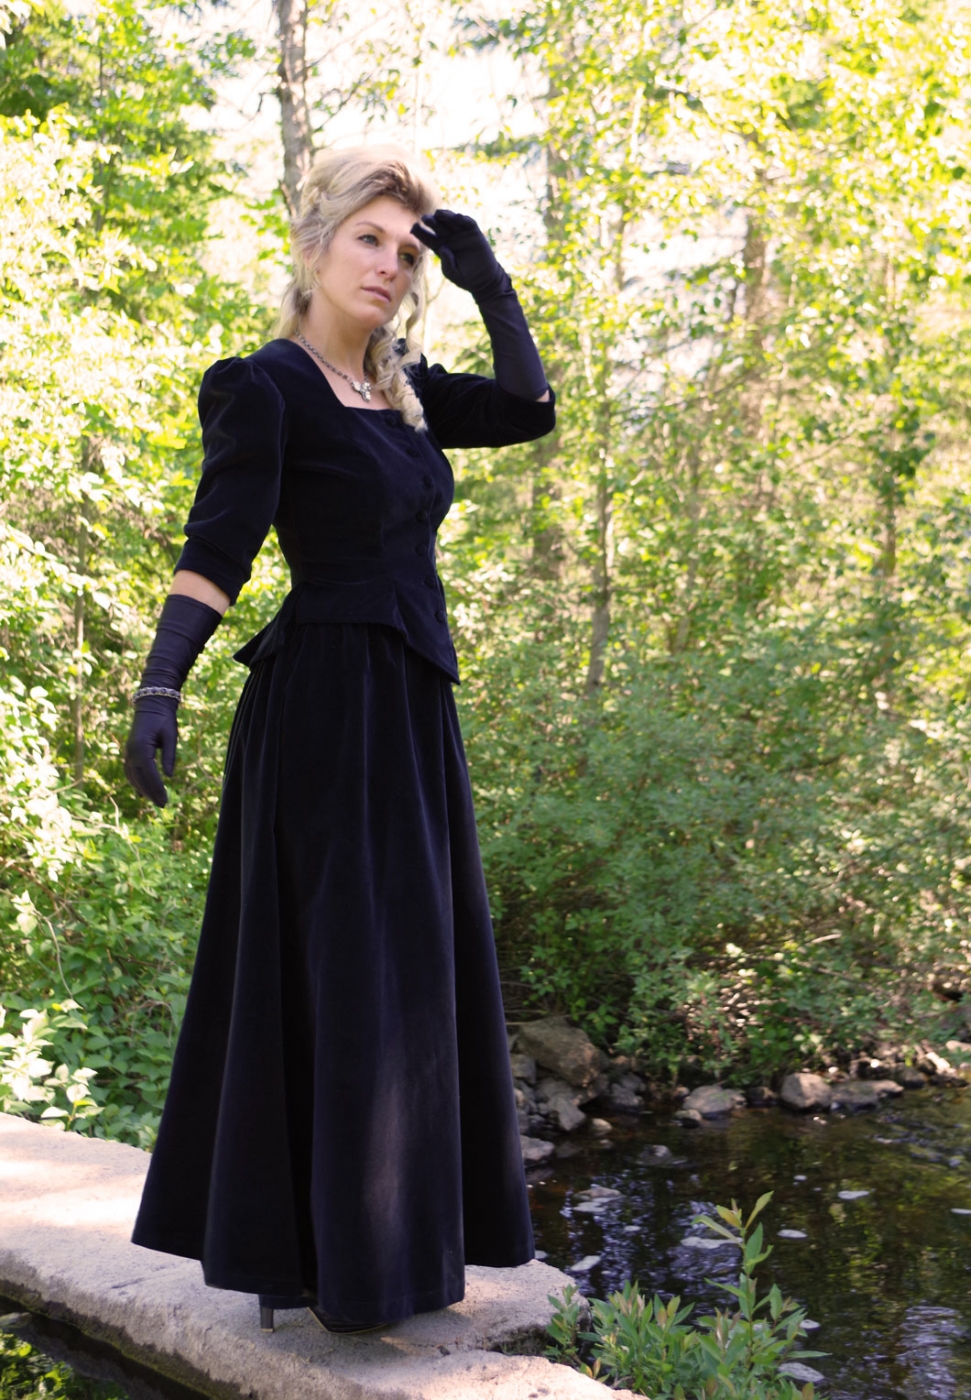 Velvet Jacket and Skirt | Recollections